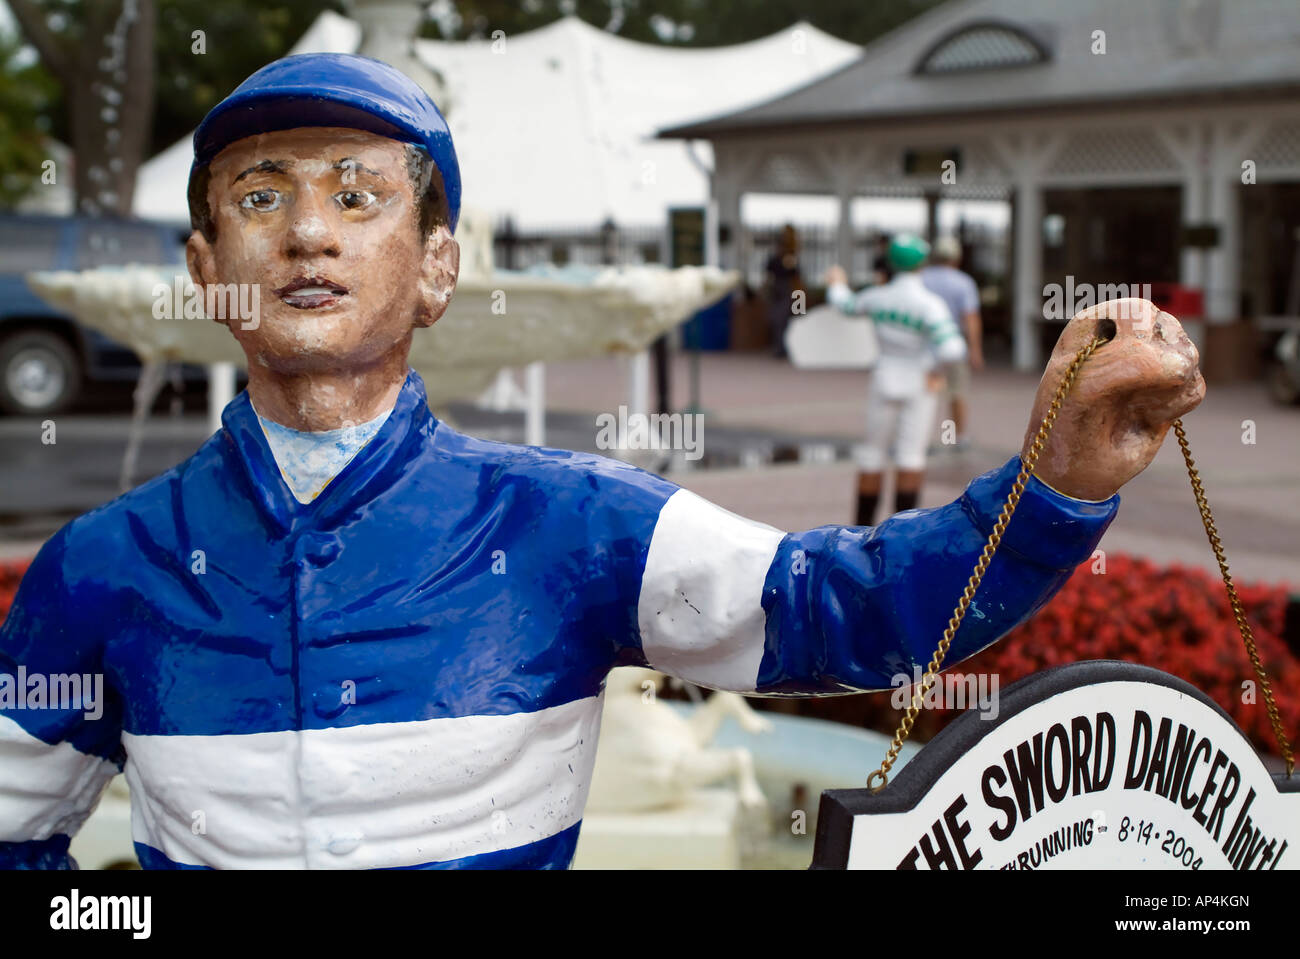 One of a circle of Lawn Jockeys in Saratoga Stock Photo